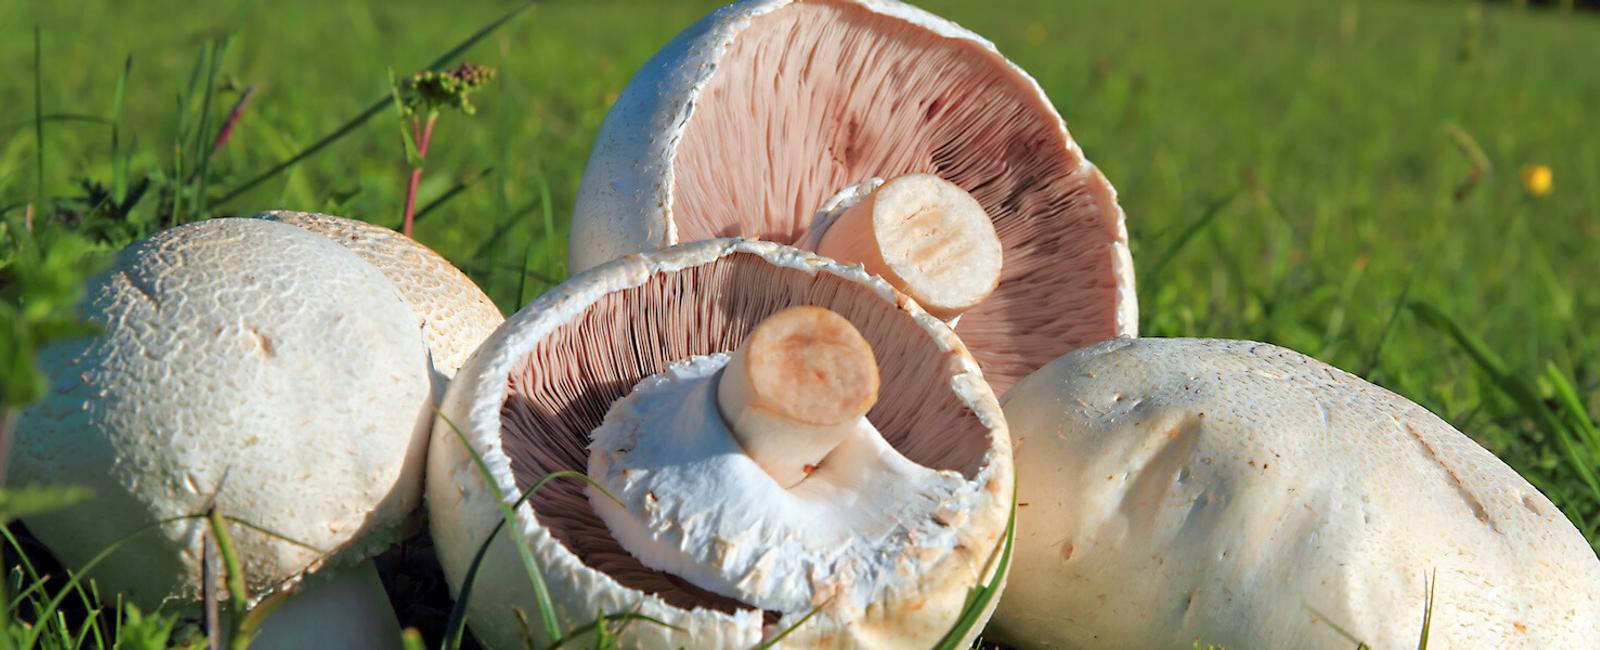 The Complete Guide to Button Mushrooms